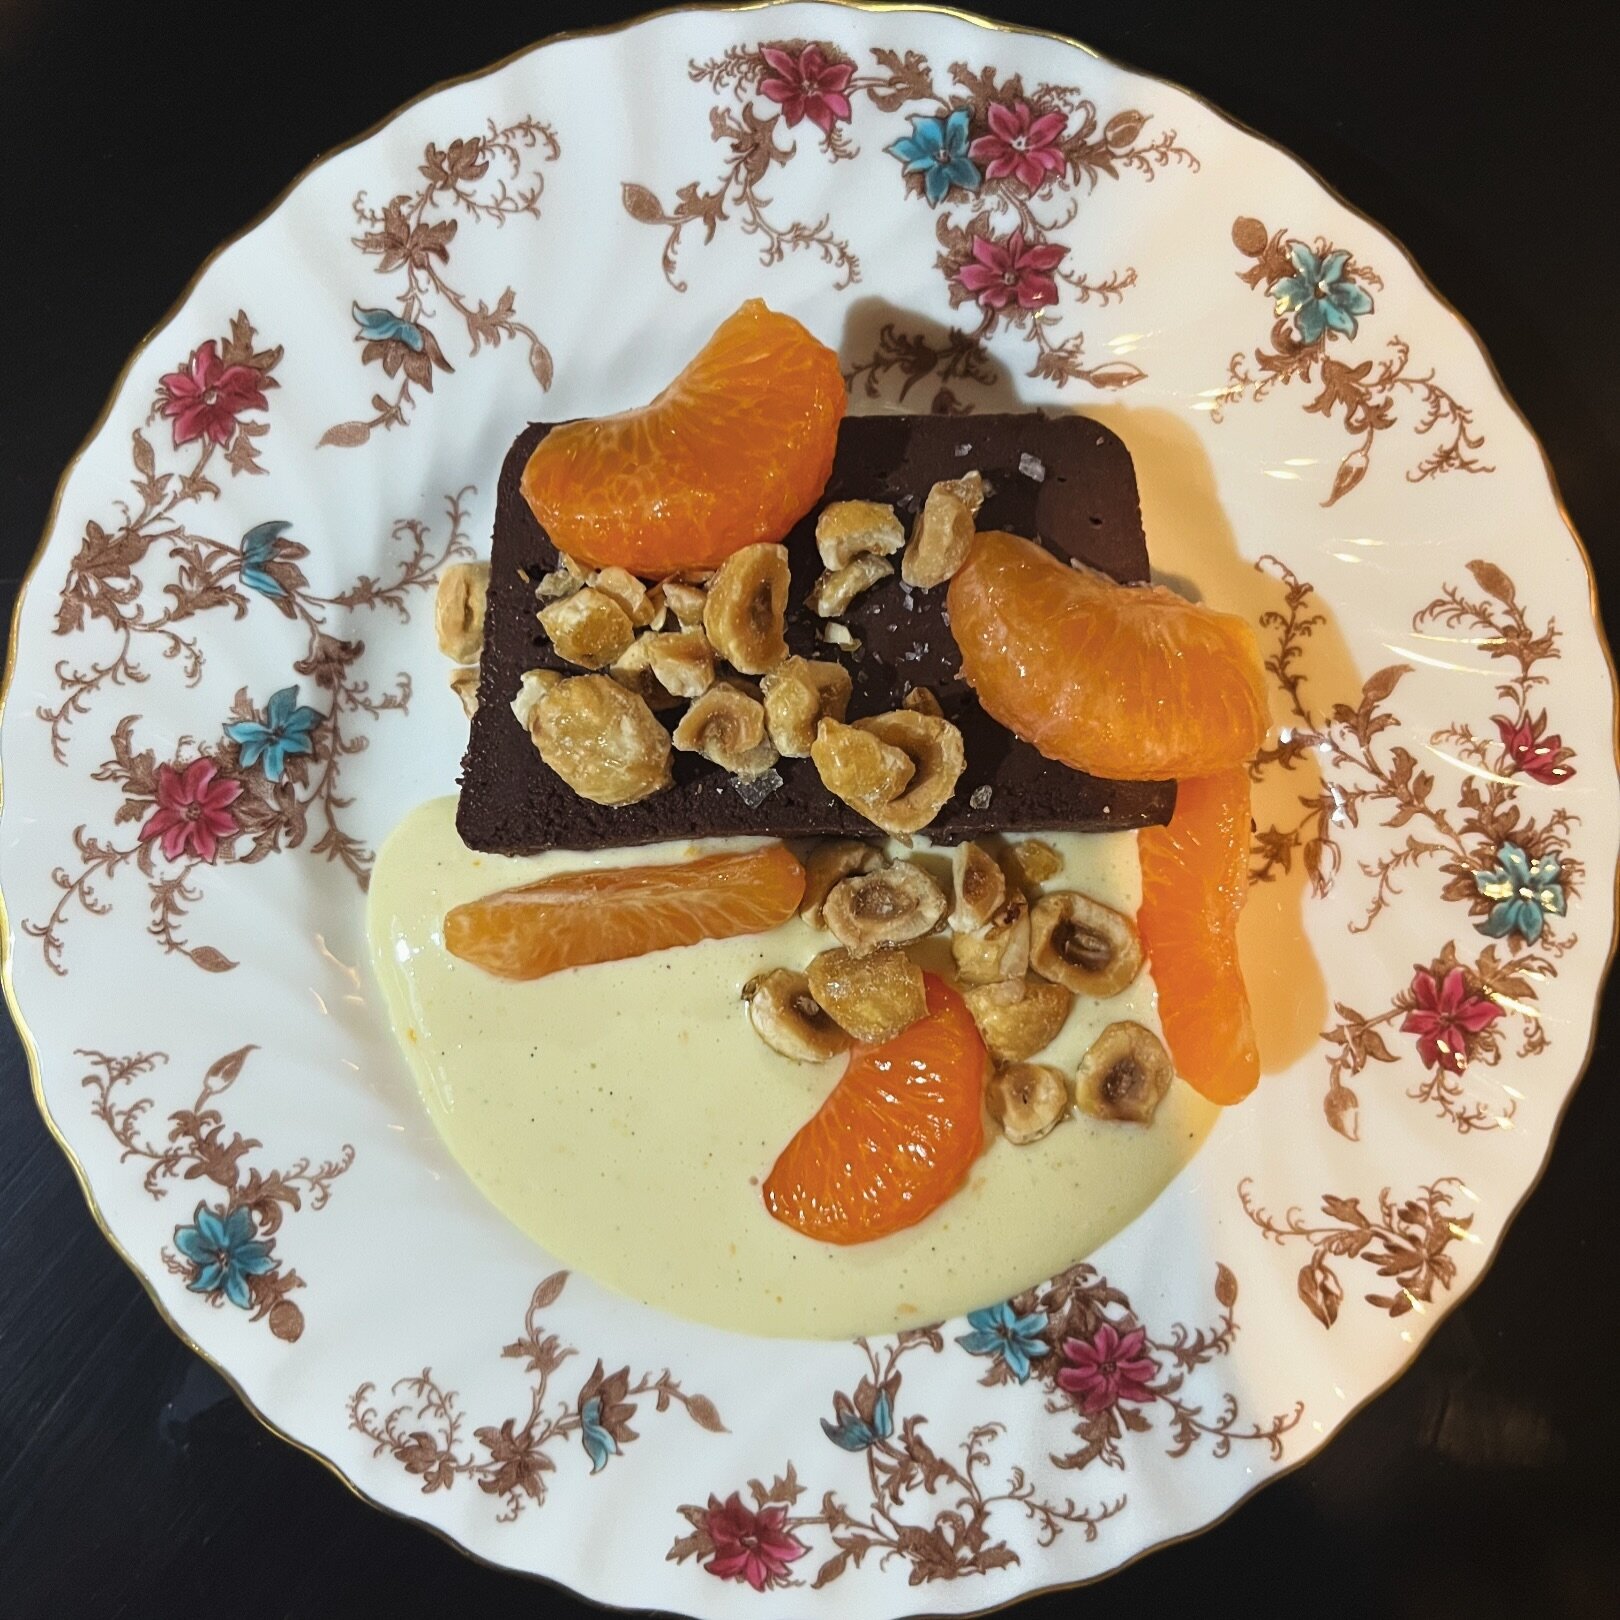 Chocolate + Orange 🤌 A beautiful marriage of flavors. Our new chocolate mousse terrine with mandarins, hazelnuts, and cr&egrave;me anglaise is a sumptuous way to end your evening at the Bistro. #justsayoui

#chocolatelover #dessert #chocolatedessert